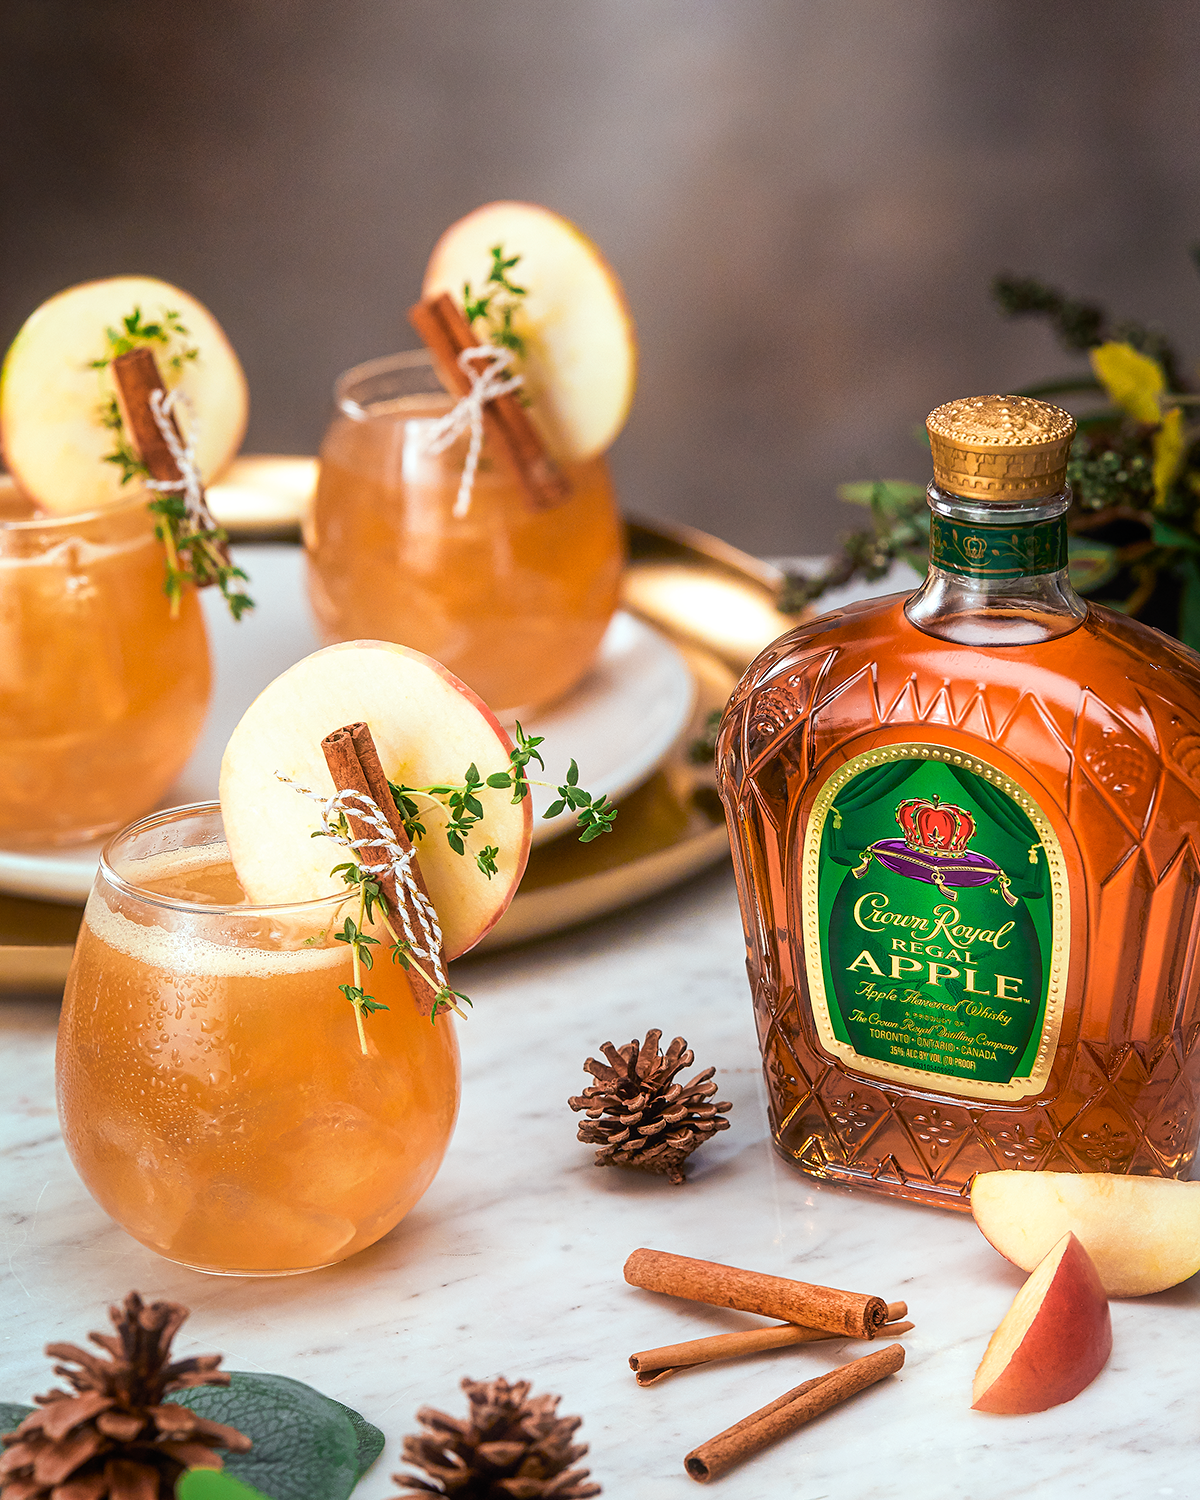 Crown Royal The Maple Apple Whisky Cocktail